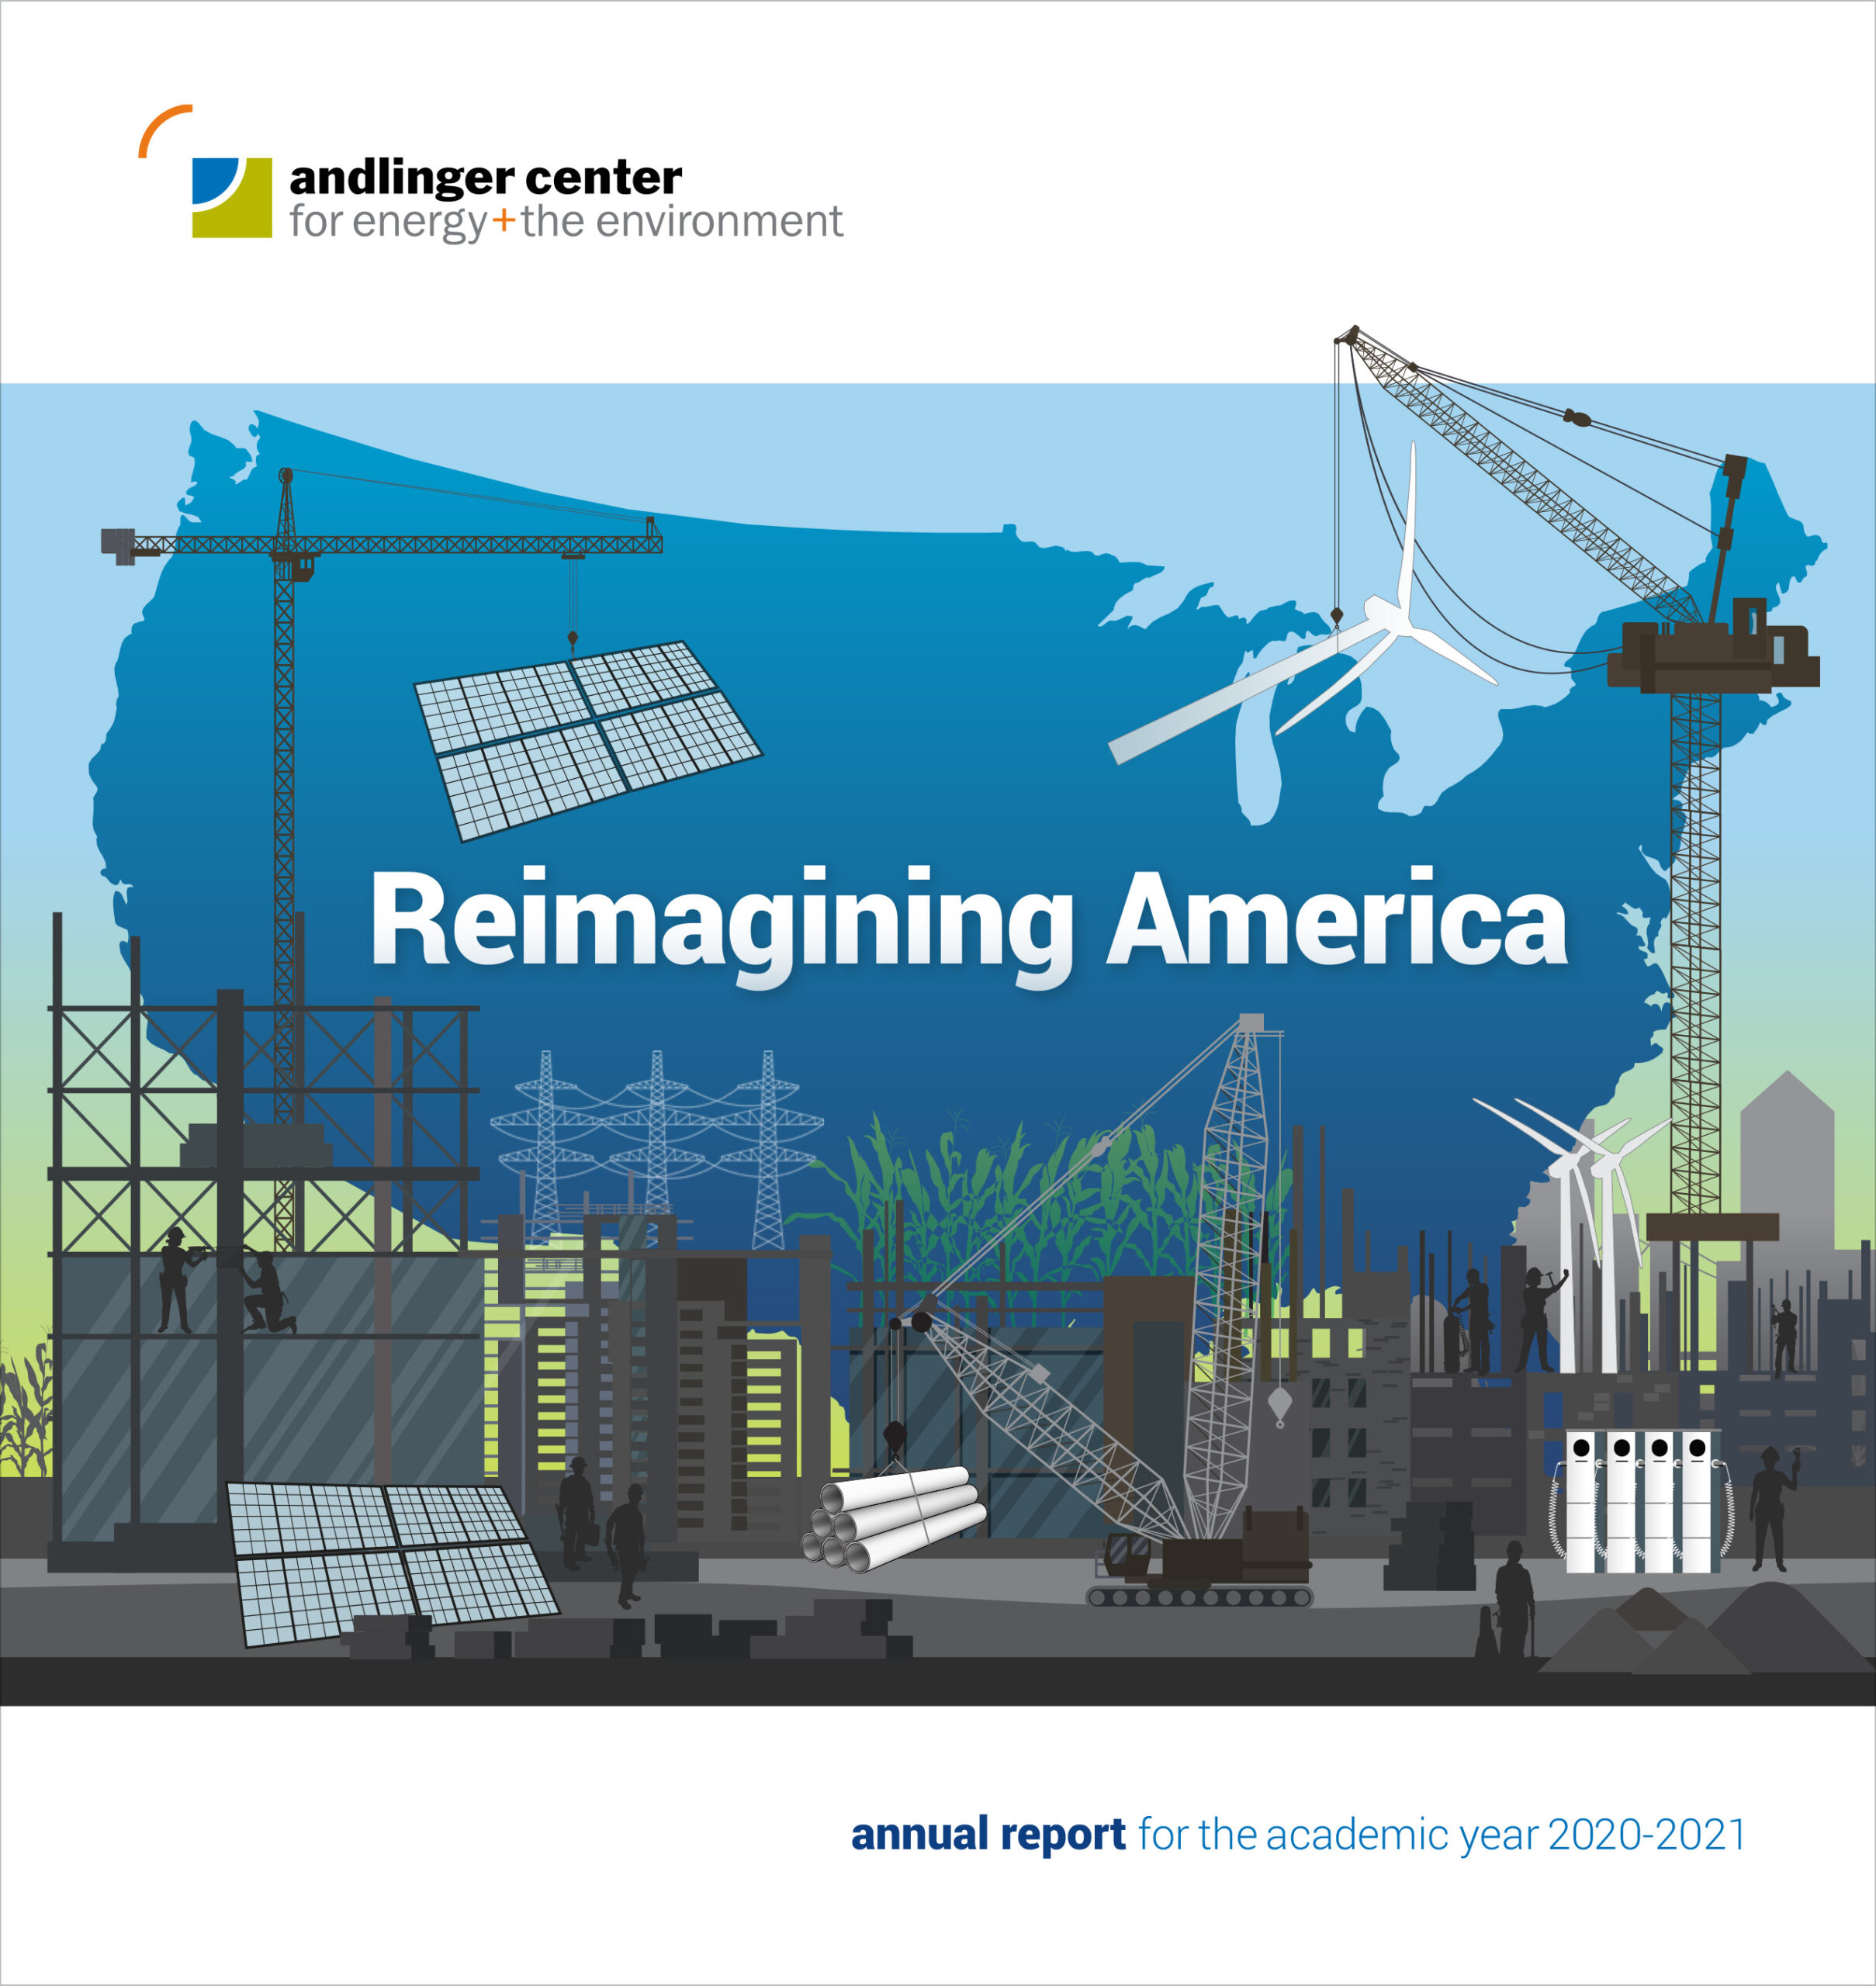 The Andlinger Center’s annual report for the academic year 2020-2021 focuses on the Center’s interdisciplinary research, the groundbreaking Net-Zero America study, the growth of the E-ffiliates program, and rising stars.